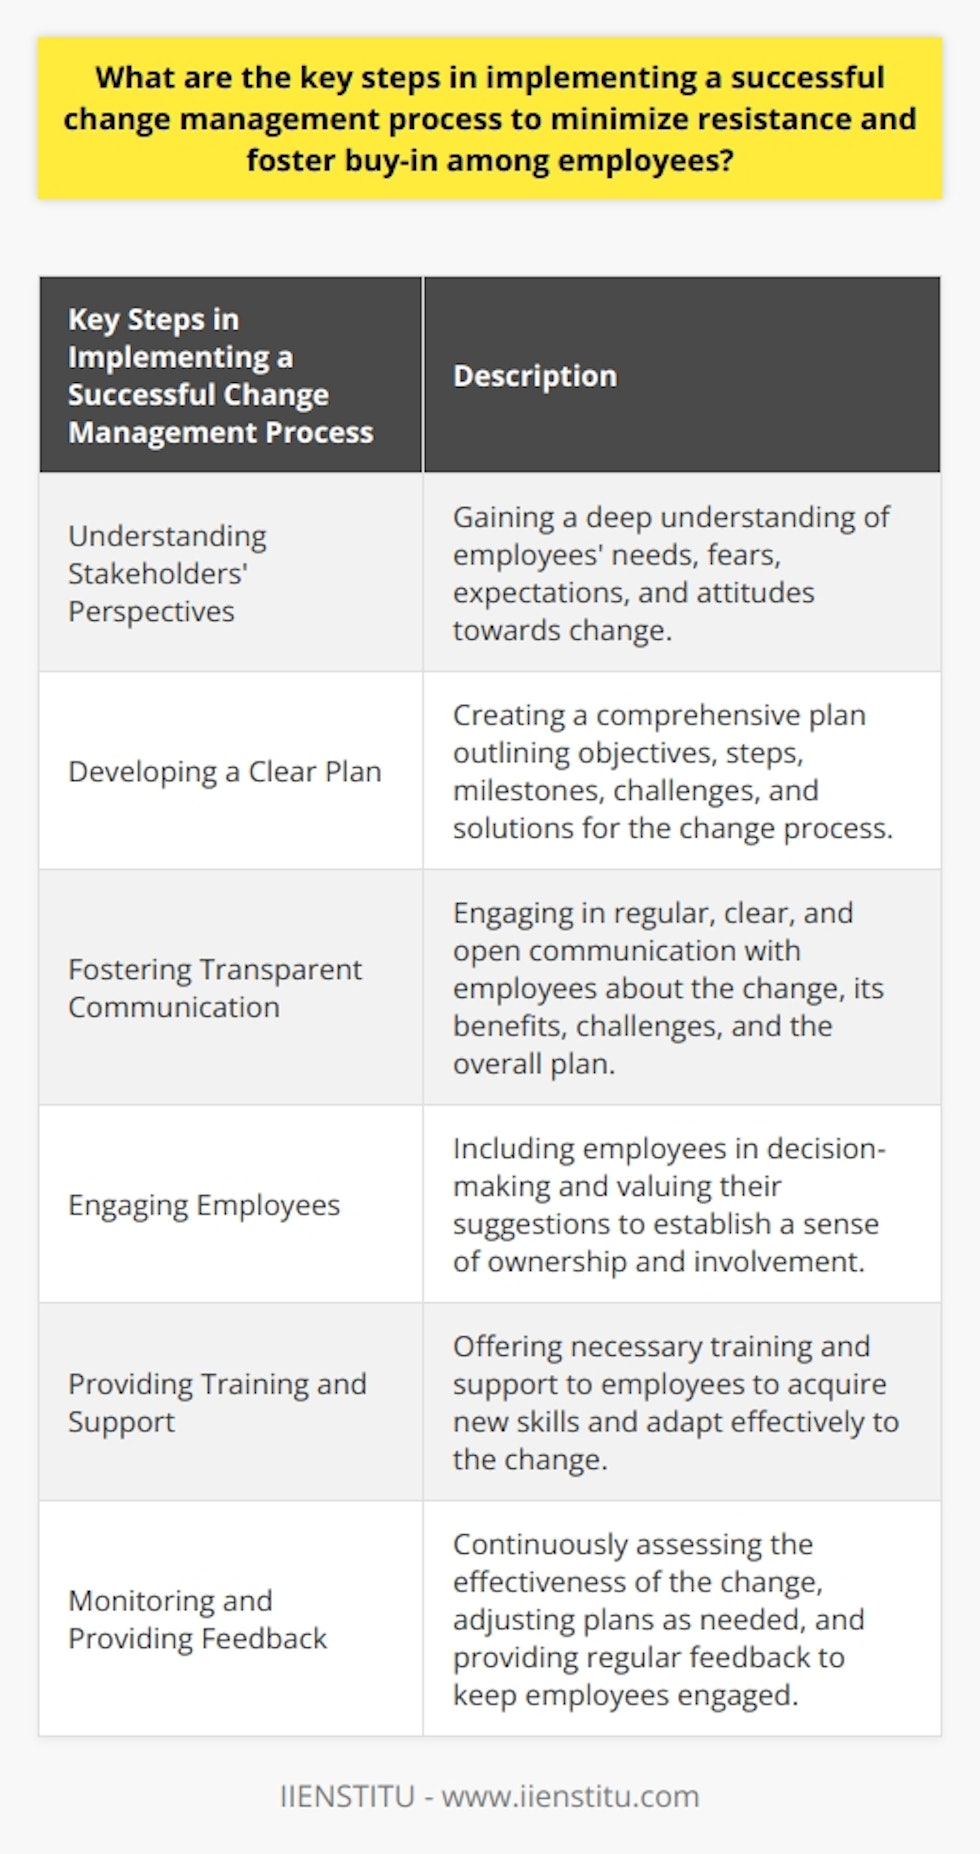 Implementing a successful change management process requires careful consideration of the key steps involved. By understanding the stakeholders' perspectives, developing a clear plan, fostering transparent communication, engaging employees, providing training and support, and monitoring and providing feedback, organizations can minimize resistance and foster buy-in among employees.The first step is to understand the perspectives of the stakeholders, primarily the employees. By gaining a deep understanding of their needs, fears, expectations, and attitudes towards change, organizations can tailor their approach and address any concerns that may arise. This understanding will be crucial in developing strategies to minimize resistance and foster buy-in.Once the stakeholders' perspectives are understood, the organization should develop a clear and comprehensive plan for the change. This plan should outline the objectives of the change, the steps to be taken, the milestones to be achieved, as well as potential challenges and their corresponding solutions. The plan should be inclusive, ensuring transparency and acting as a roadmap for effectively executing the change process.Open and transparent communication is the next key step. Regular and clear communication with the employees about the change, its benefits, potential challenges, and the overall plan is essential. Transparency helps alleviate fears, reduce resistance, and establish clear expectations among employees.Engaging employees throughout the change process is also crucial. Including employees in the decision-making process and valuing their suggestions creates a sense of ownership and involvement. This sense of ownership leads to reduced resistance and increased buy-in among employees.Providing necessary training and support to employees is another key step. Change often requires learning new skills or adapting to new ways of thinking or working. By providing training and support, organizations can help employees acquire the necessary skills and adapt to the change effectively. Continuous support during this transition phase also improves employee morale and decreases the likelihood of resistance.Monitoring and providing feedback form the final step in implementing a successful change management process. Constantly assessing the effectiveness of the change and adjusting plans as needed ensures the smooth implementation of the changes. Regular feedback enables faster problem-solving and keeps employees engaged in the change process.In conclusion, understanding stakeholders' perspectives, developing a clear plan, fostering transparent communication, engaging employees, providing training and support, and monitoring and providing feedback are the key steps in implementing a successful change management process. By following these steps, organizations can minimize resistance and foster buy-in among employees, ultimately leading to successful change implementation.